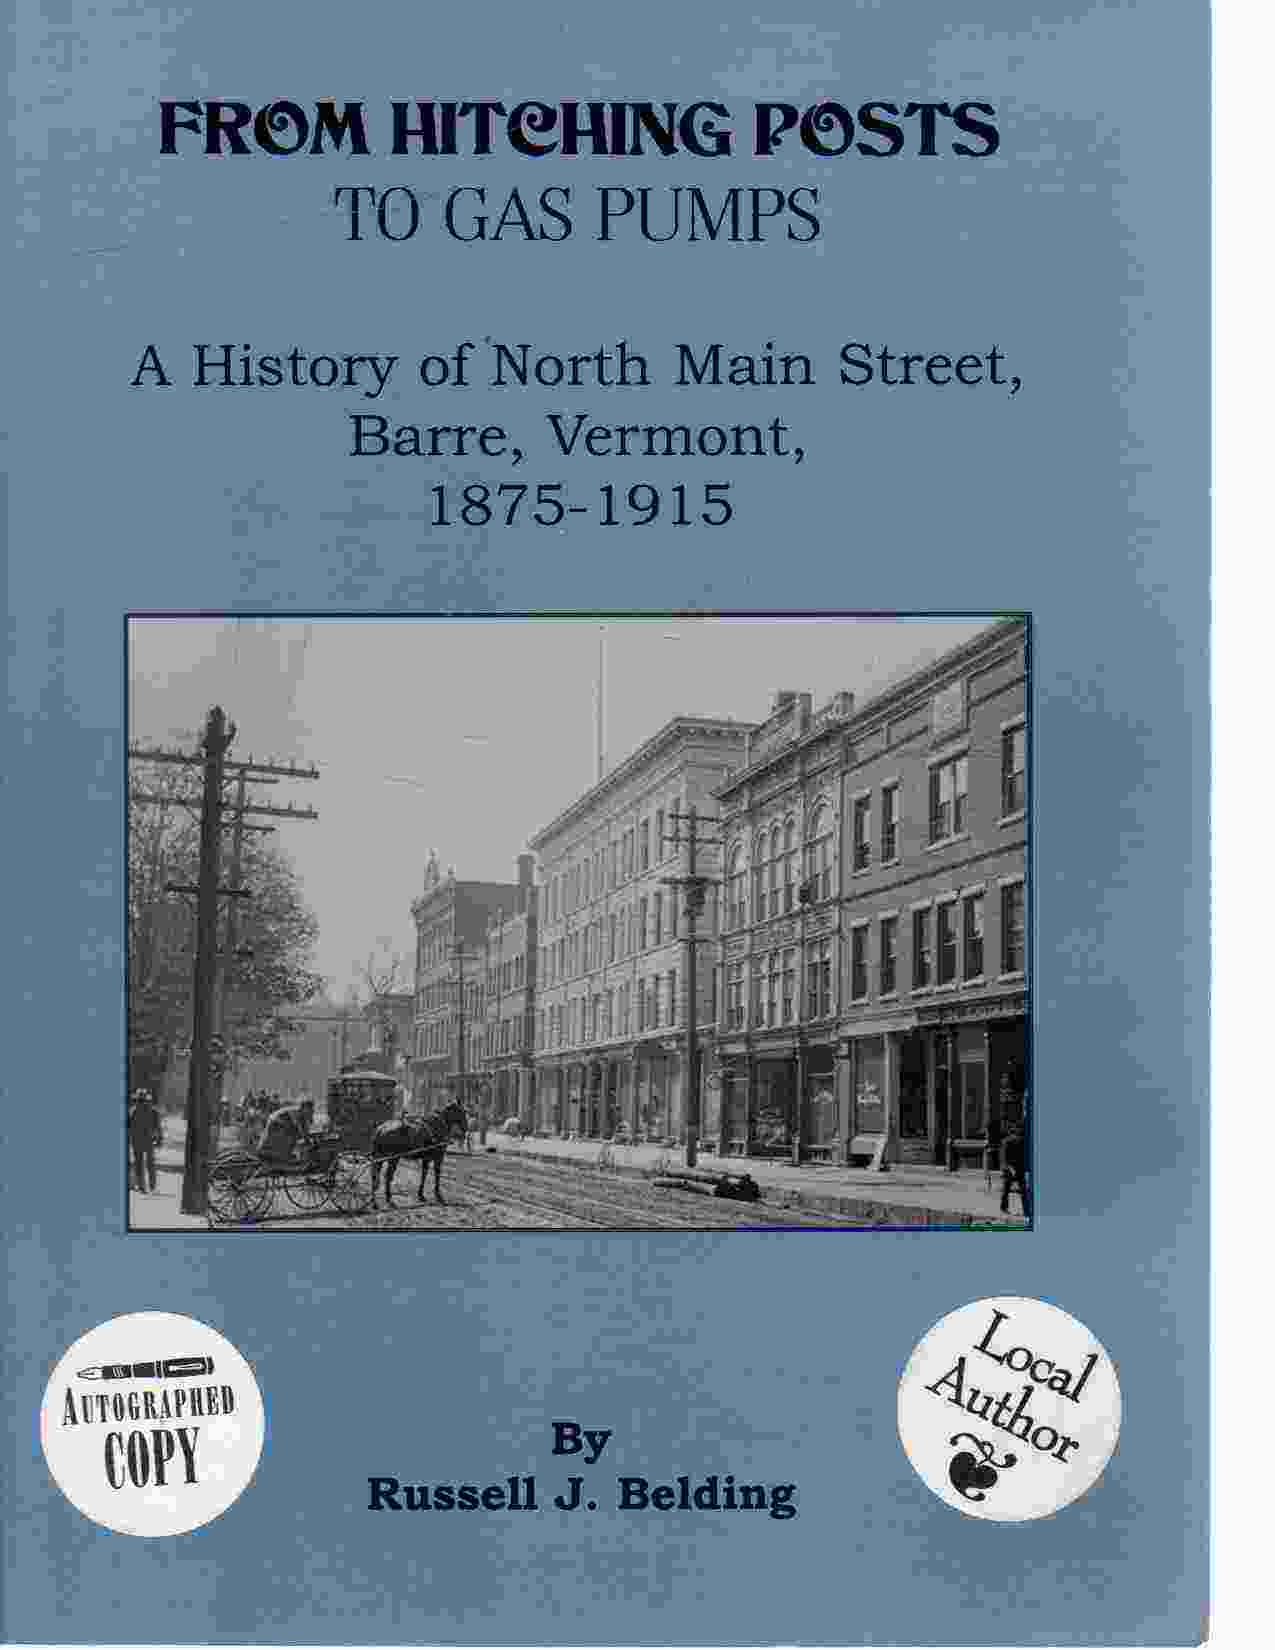 BELDING, RUSSELL J. - From Hitching Posts to Gas Pumps a History of North Main Street, Barre, Vermont, 1875-1915